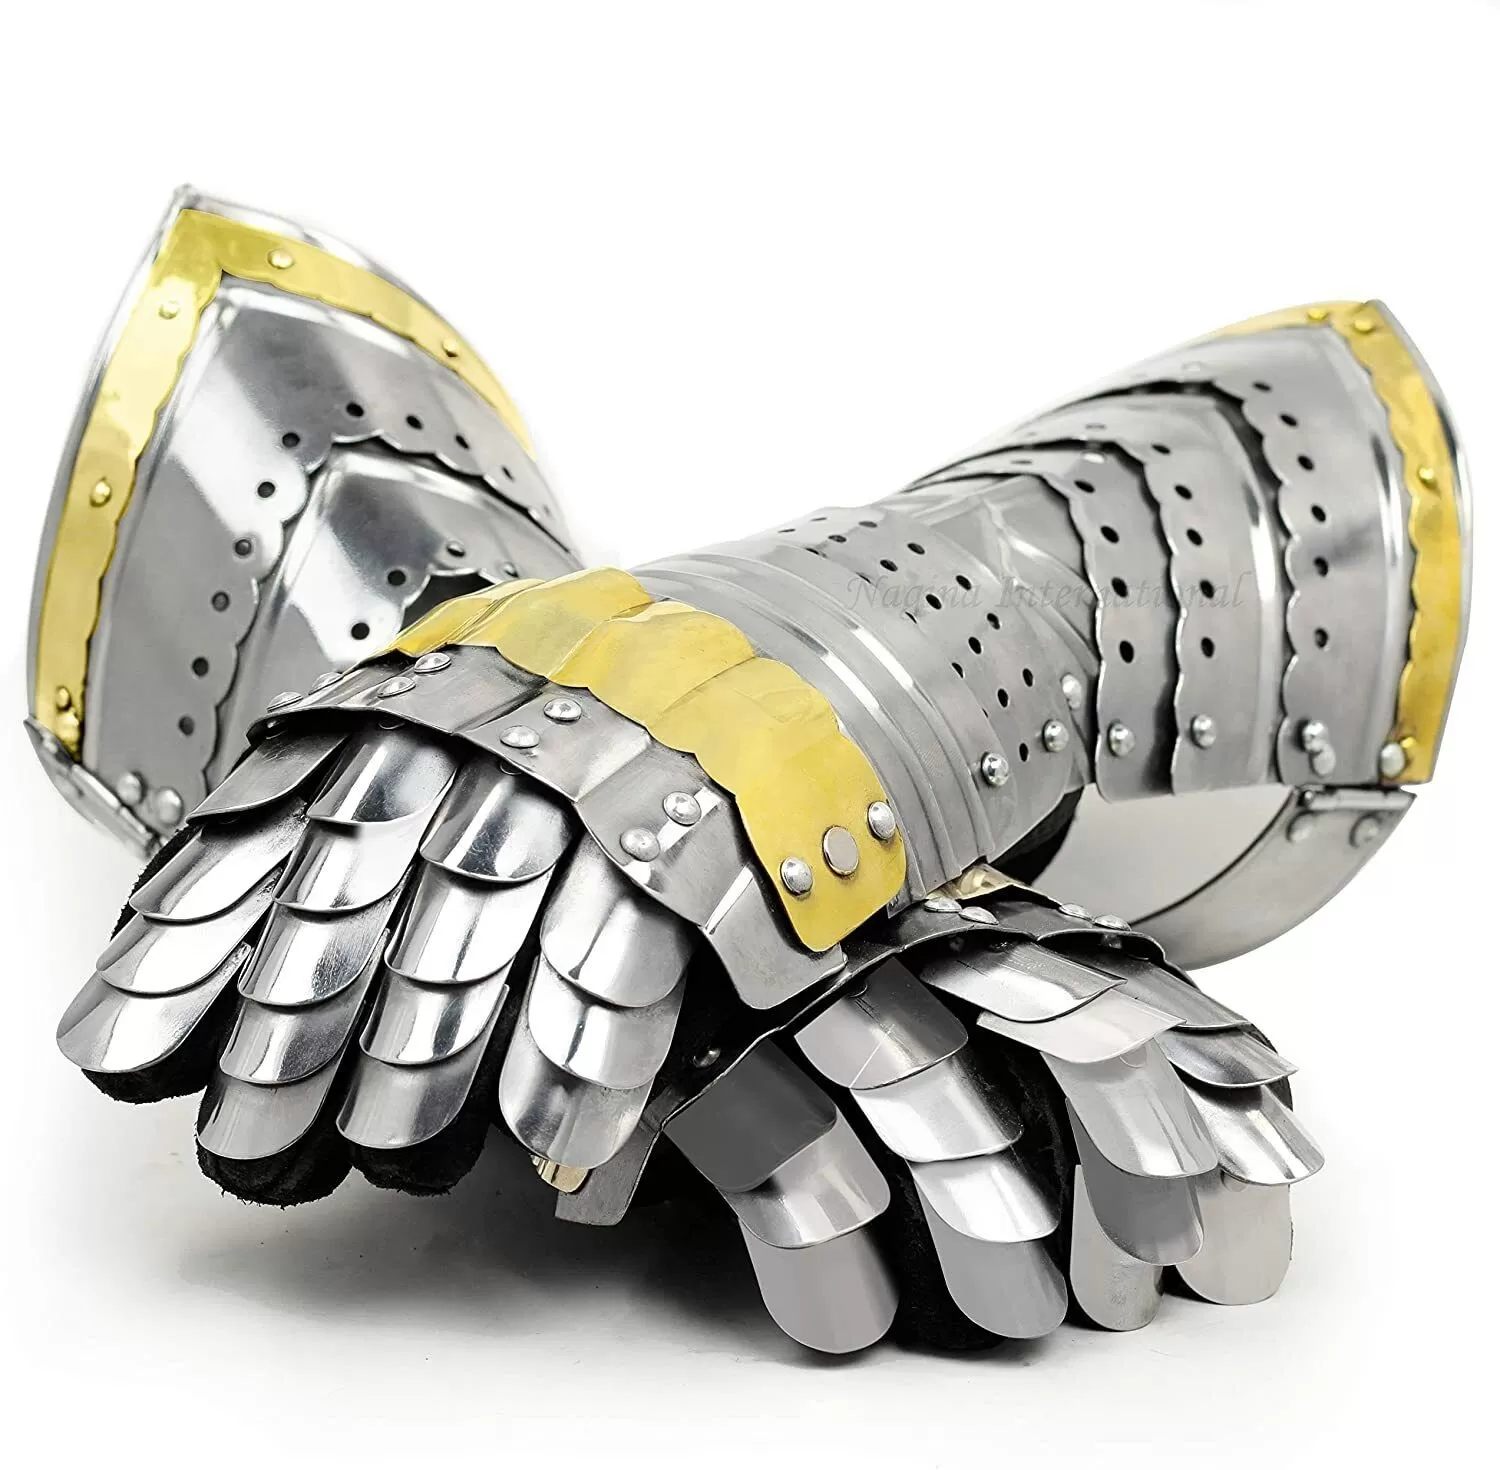 Gauntlet Armor Pair Brass Accents Medieval Knight Gloves SCA